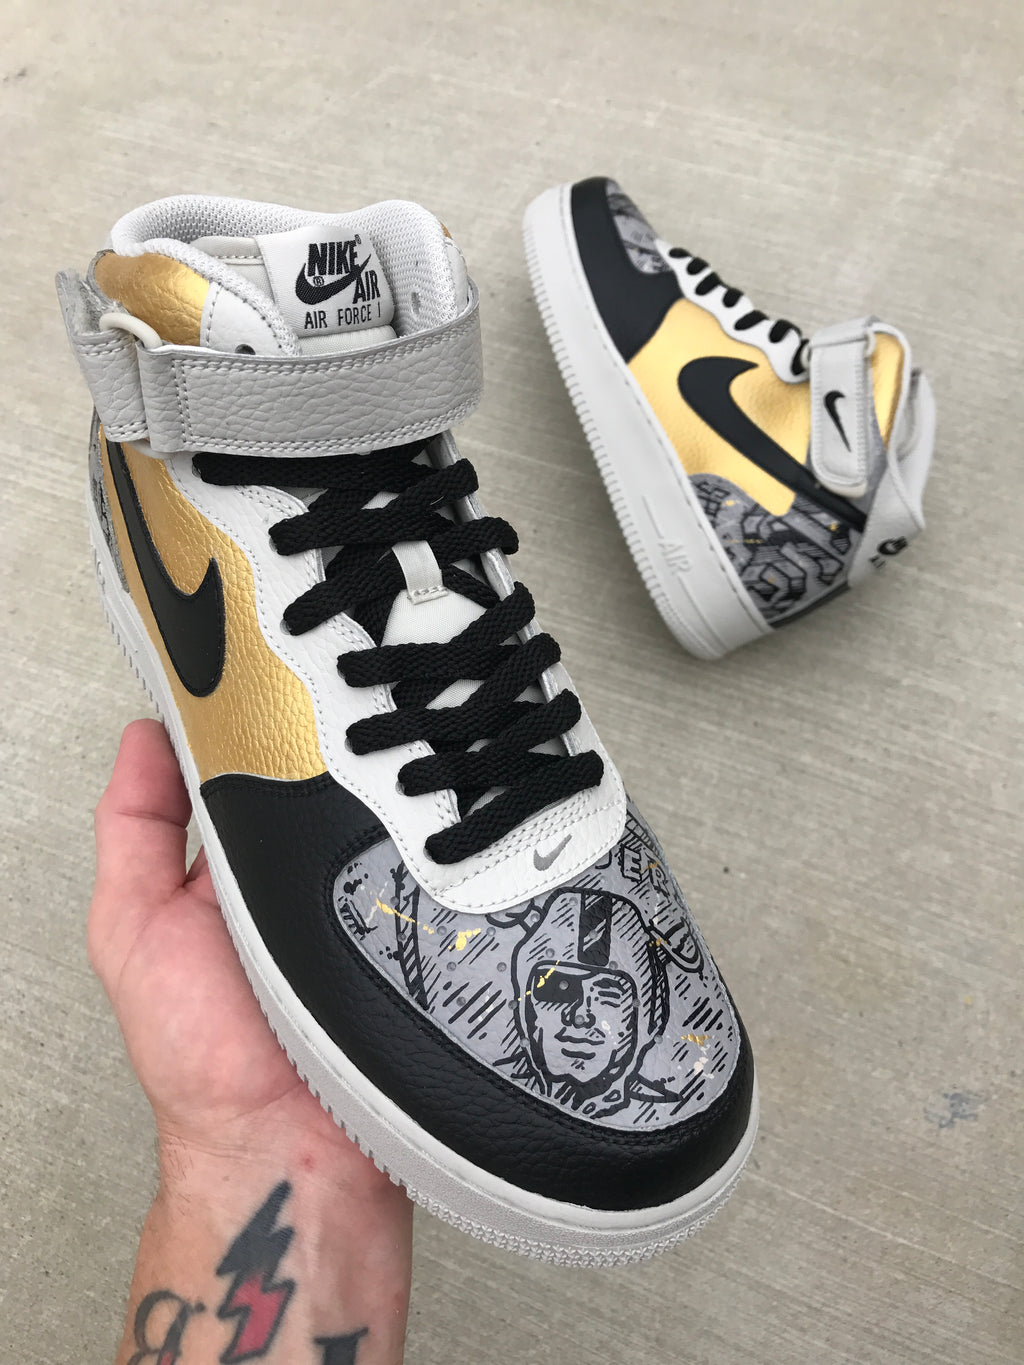 To the Bay - Nike AF1 shoes